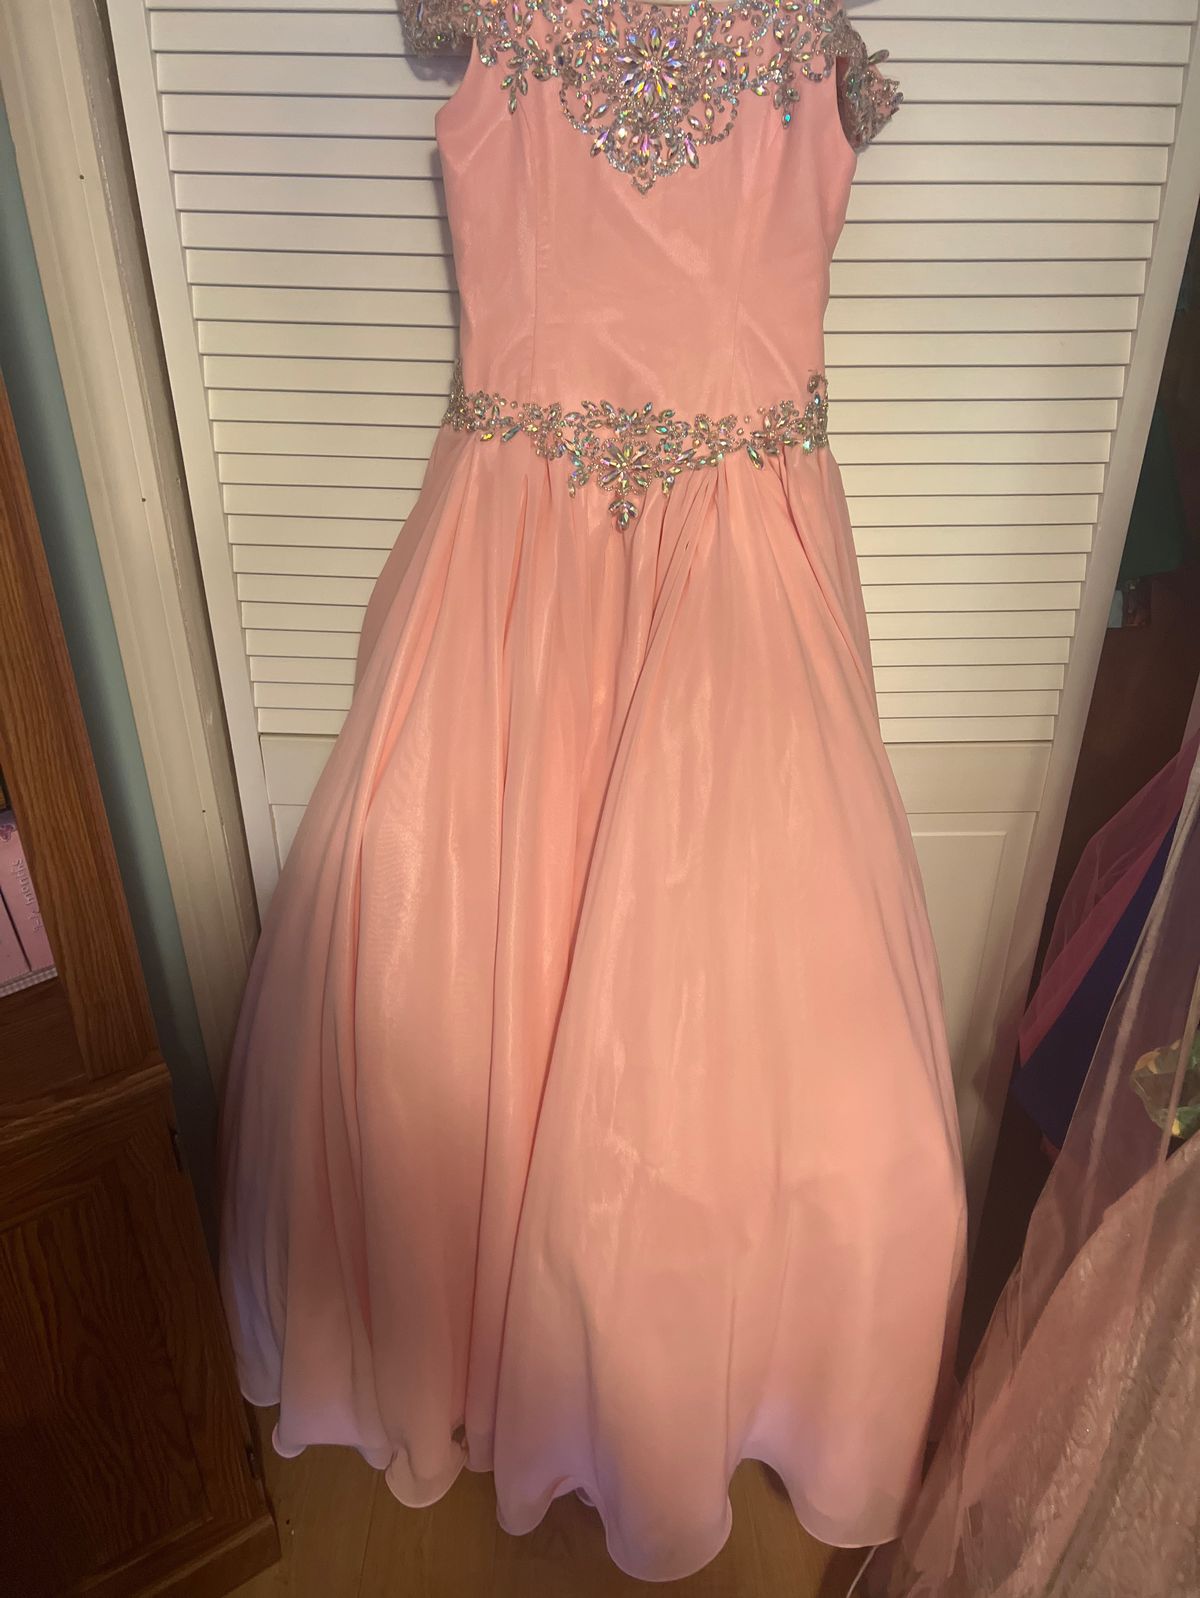 Dandanli Girls Size 14 Prom Pink Ball Gown on Queenly